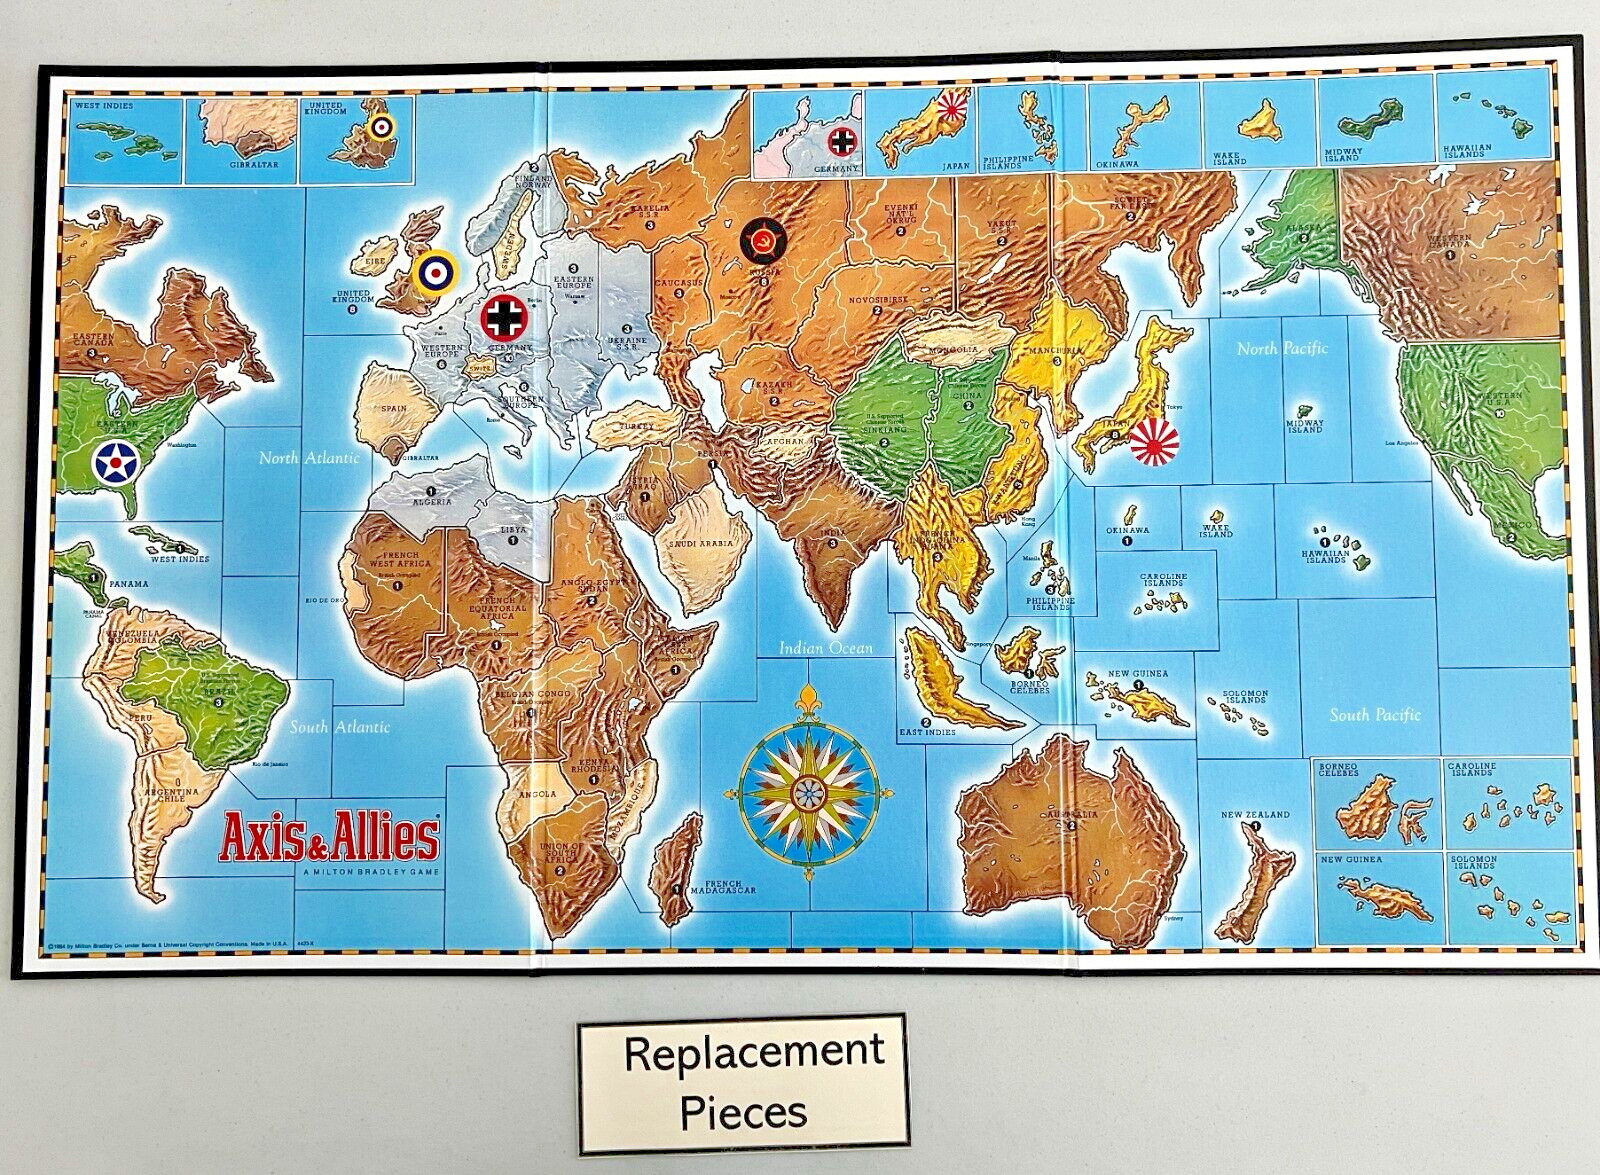 1984 Axis & Allies: Game Board Replacement